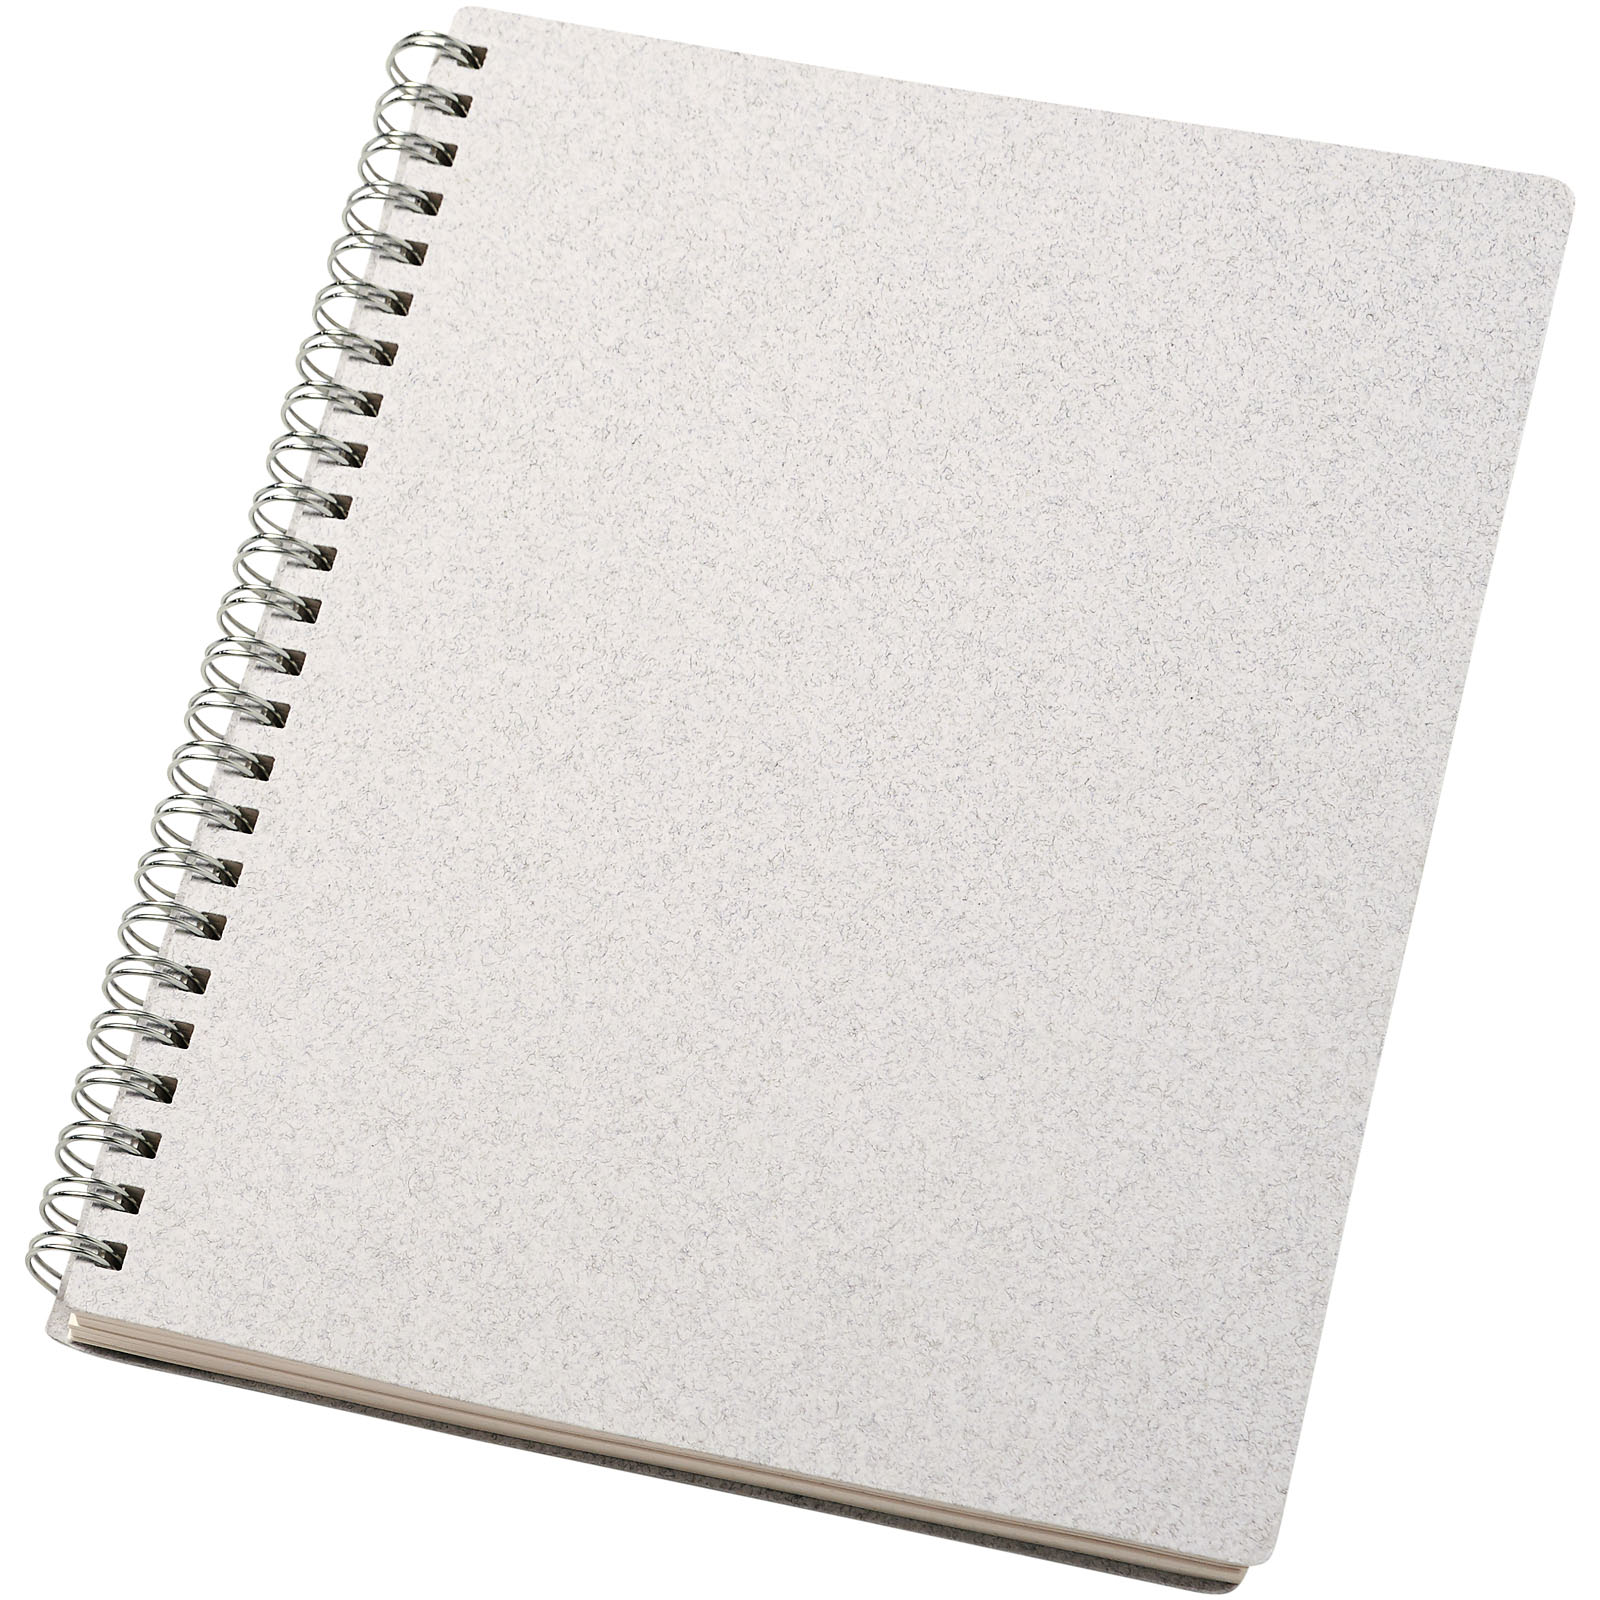 Advertising Notebooks - Bianco A5 size wire-o notebook